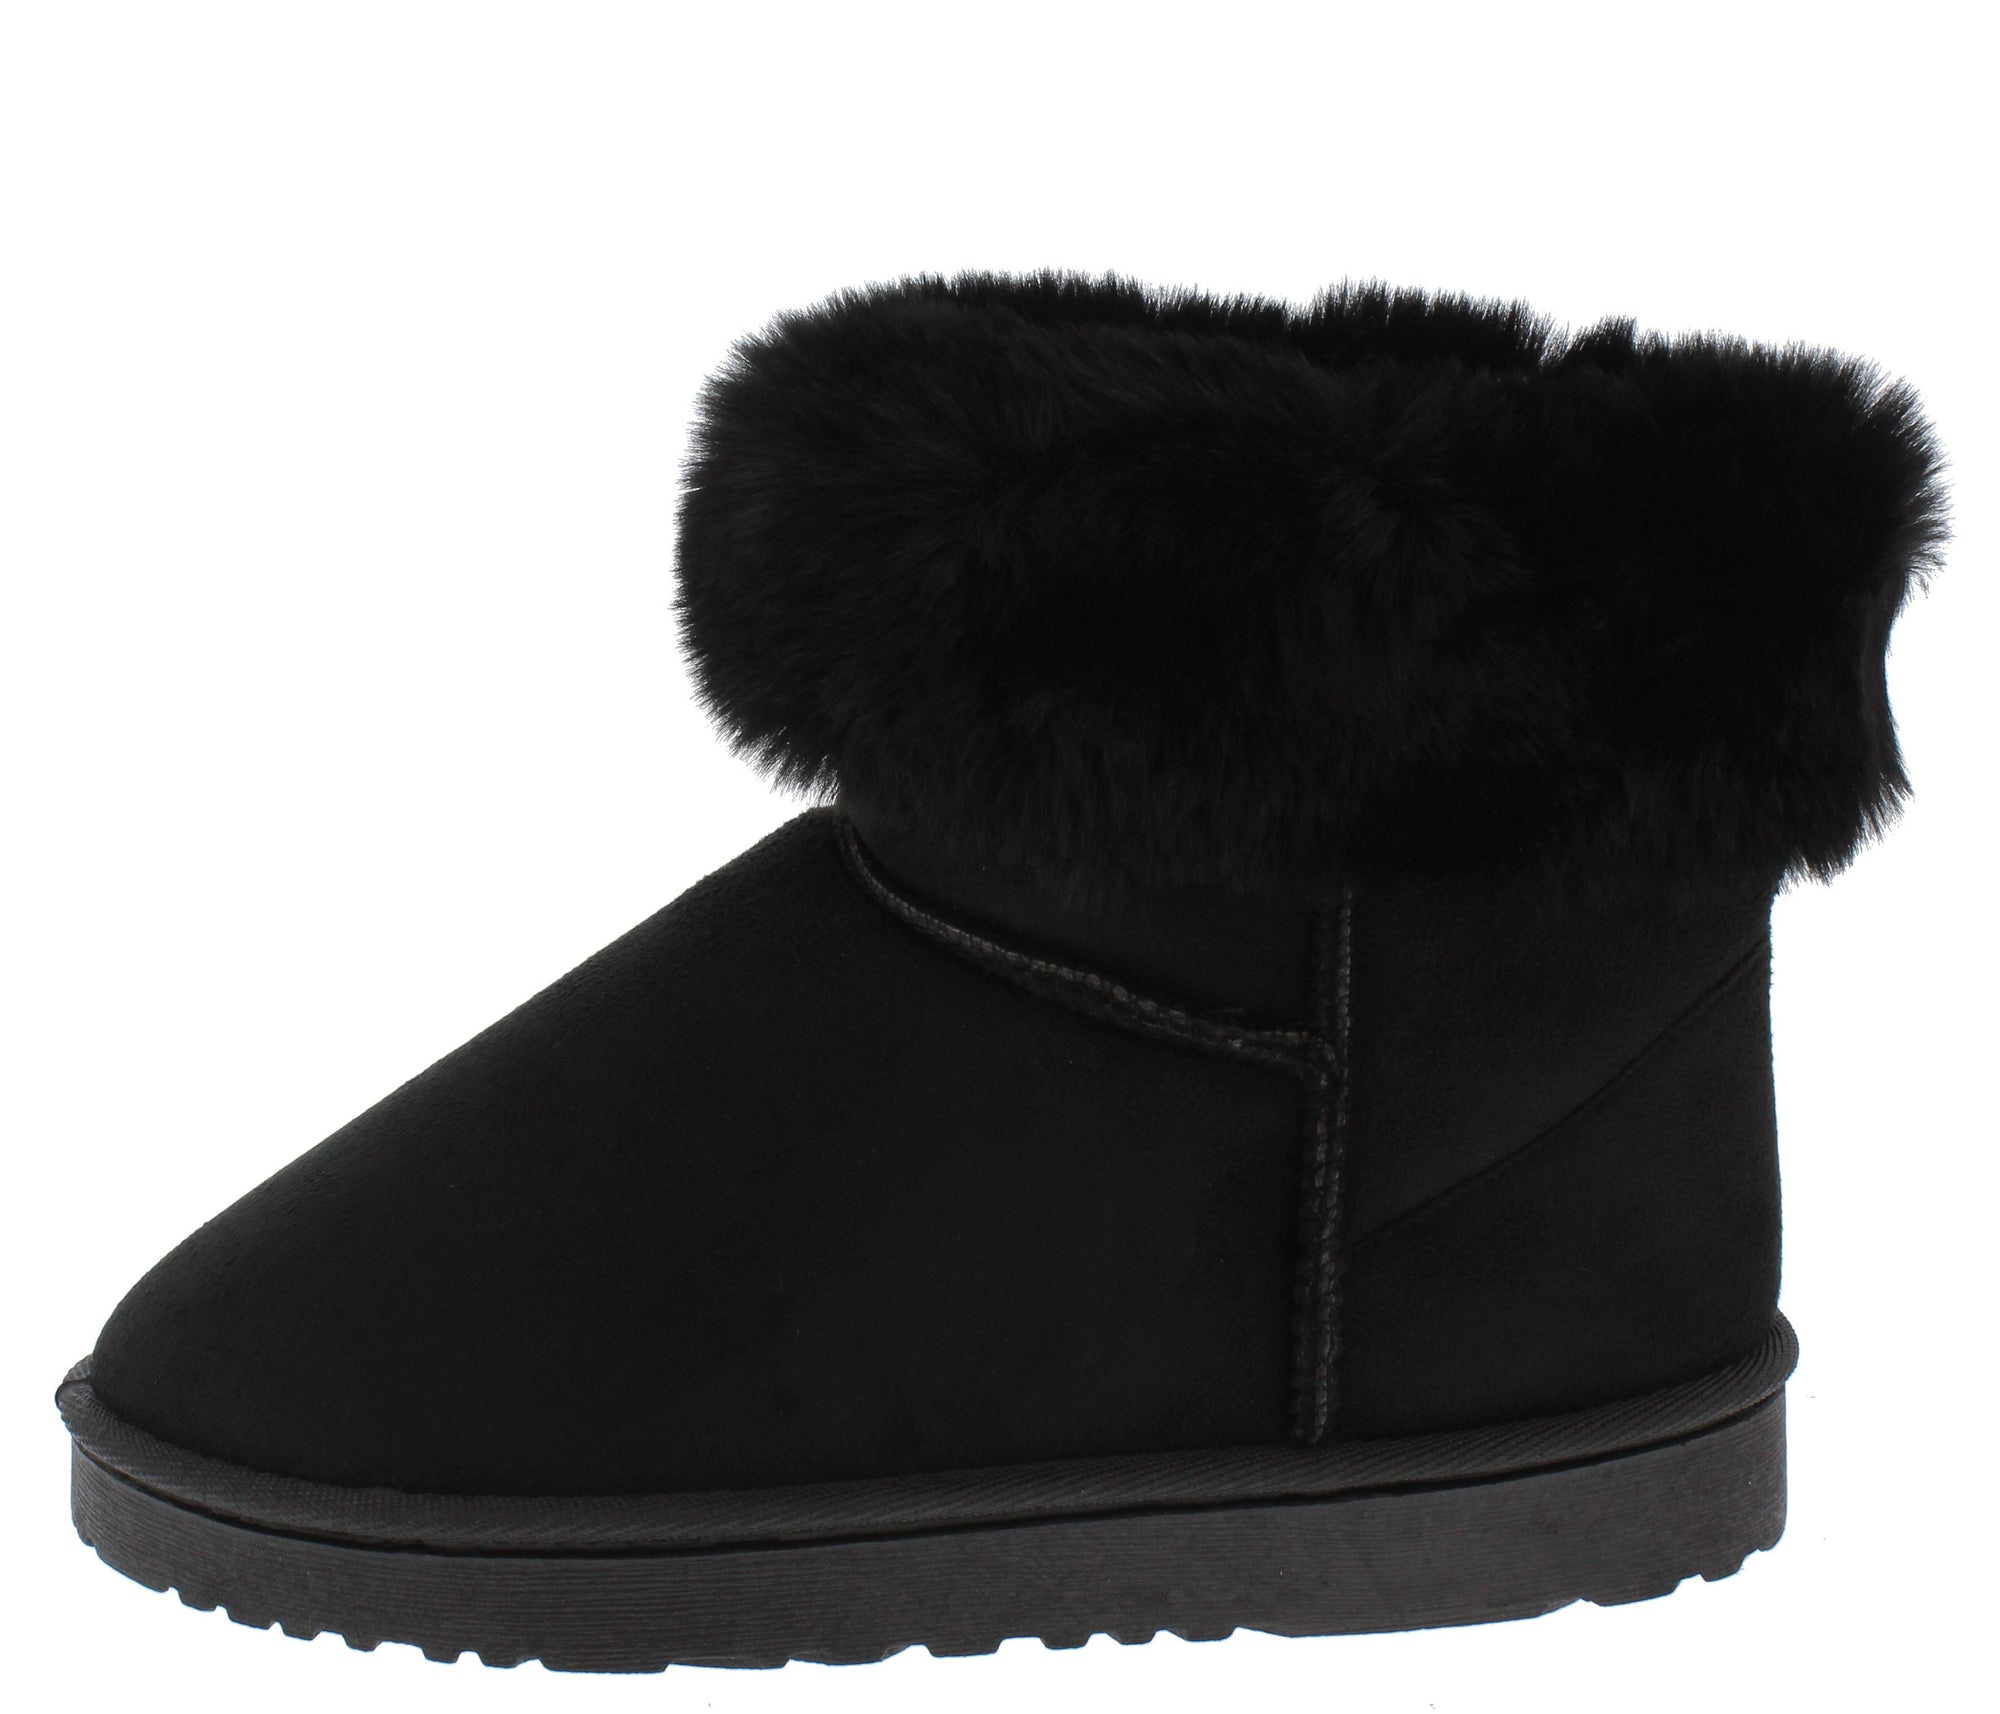 black fluffy shoes